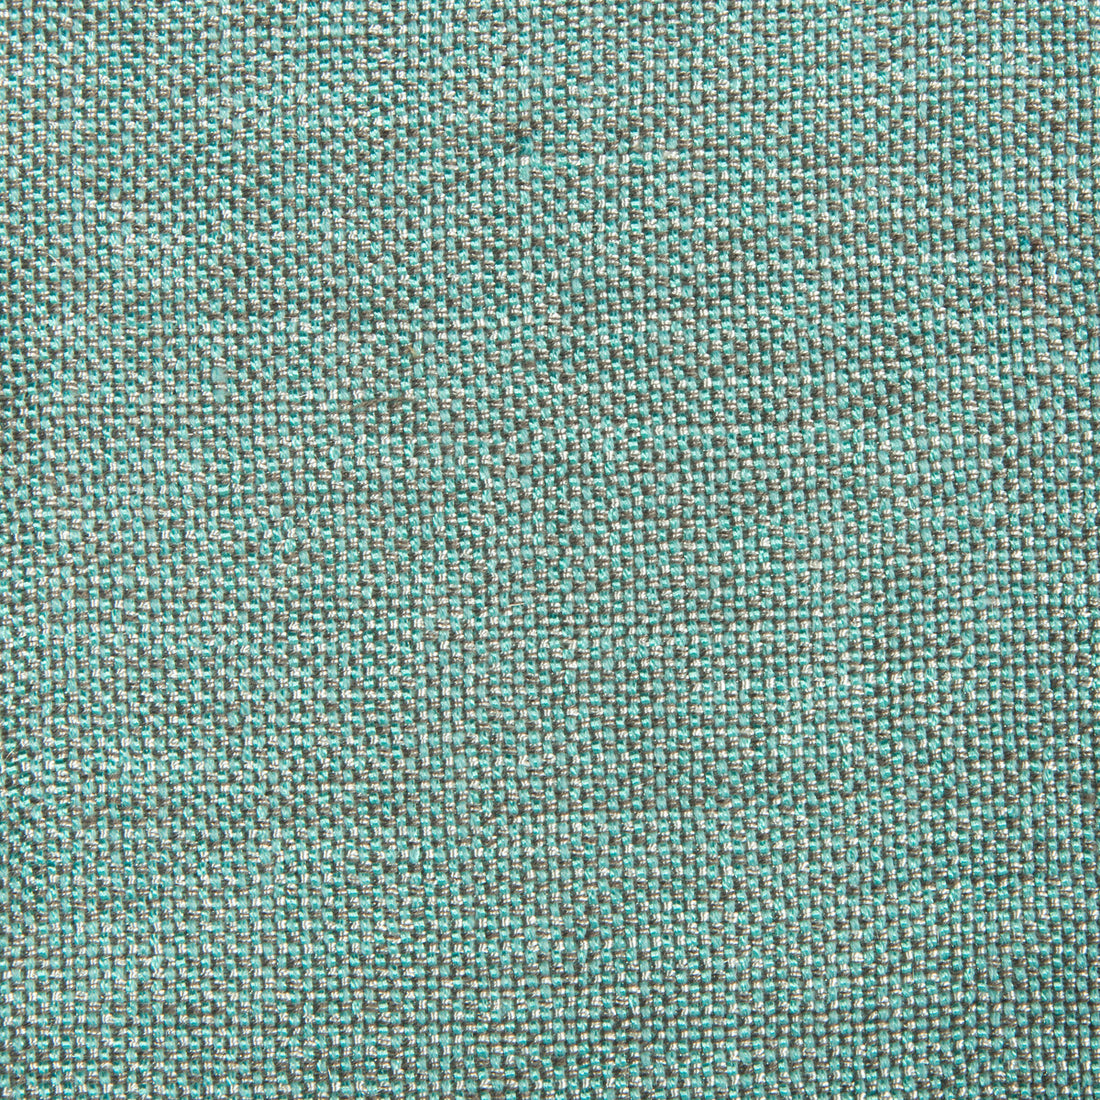 Kravet Contract fabric in 4458-1311 color - pattern 4458.1311.0 - by Kravet Contract